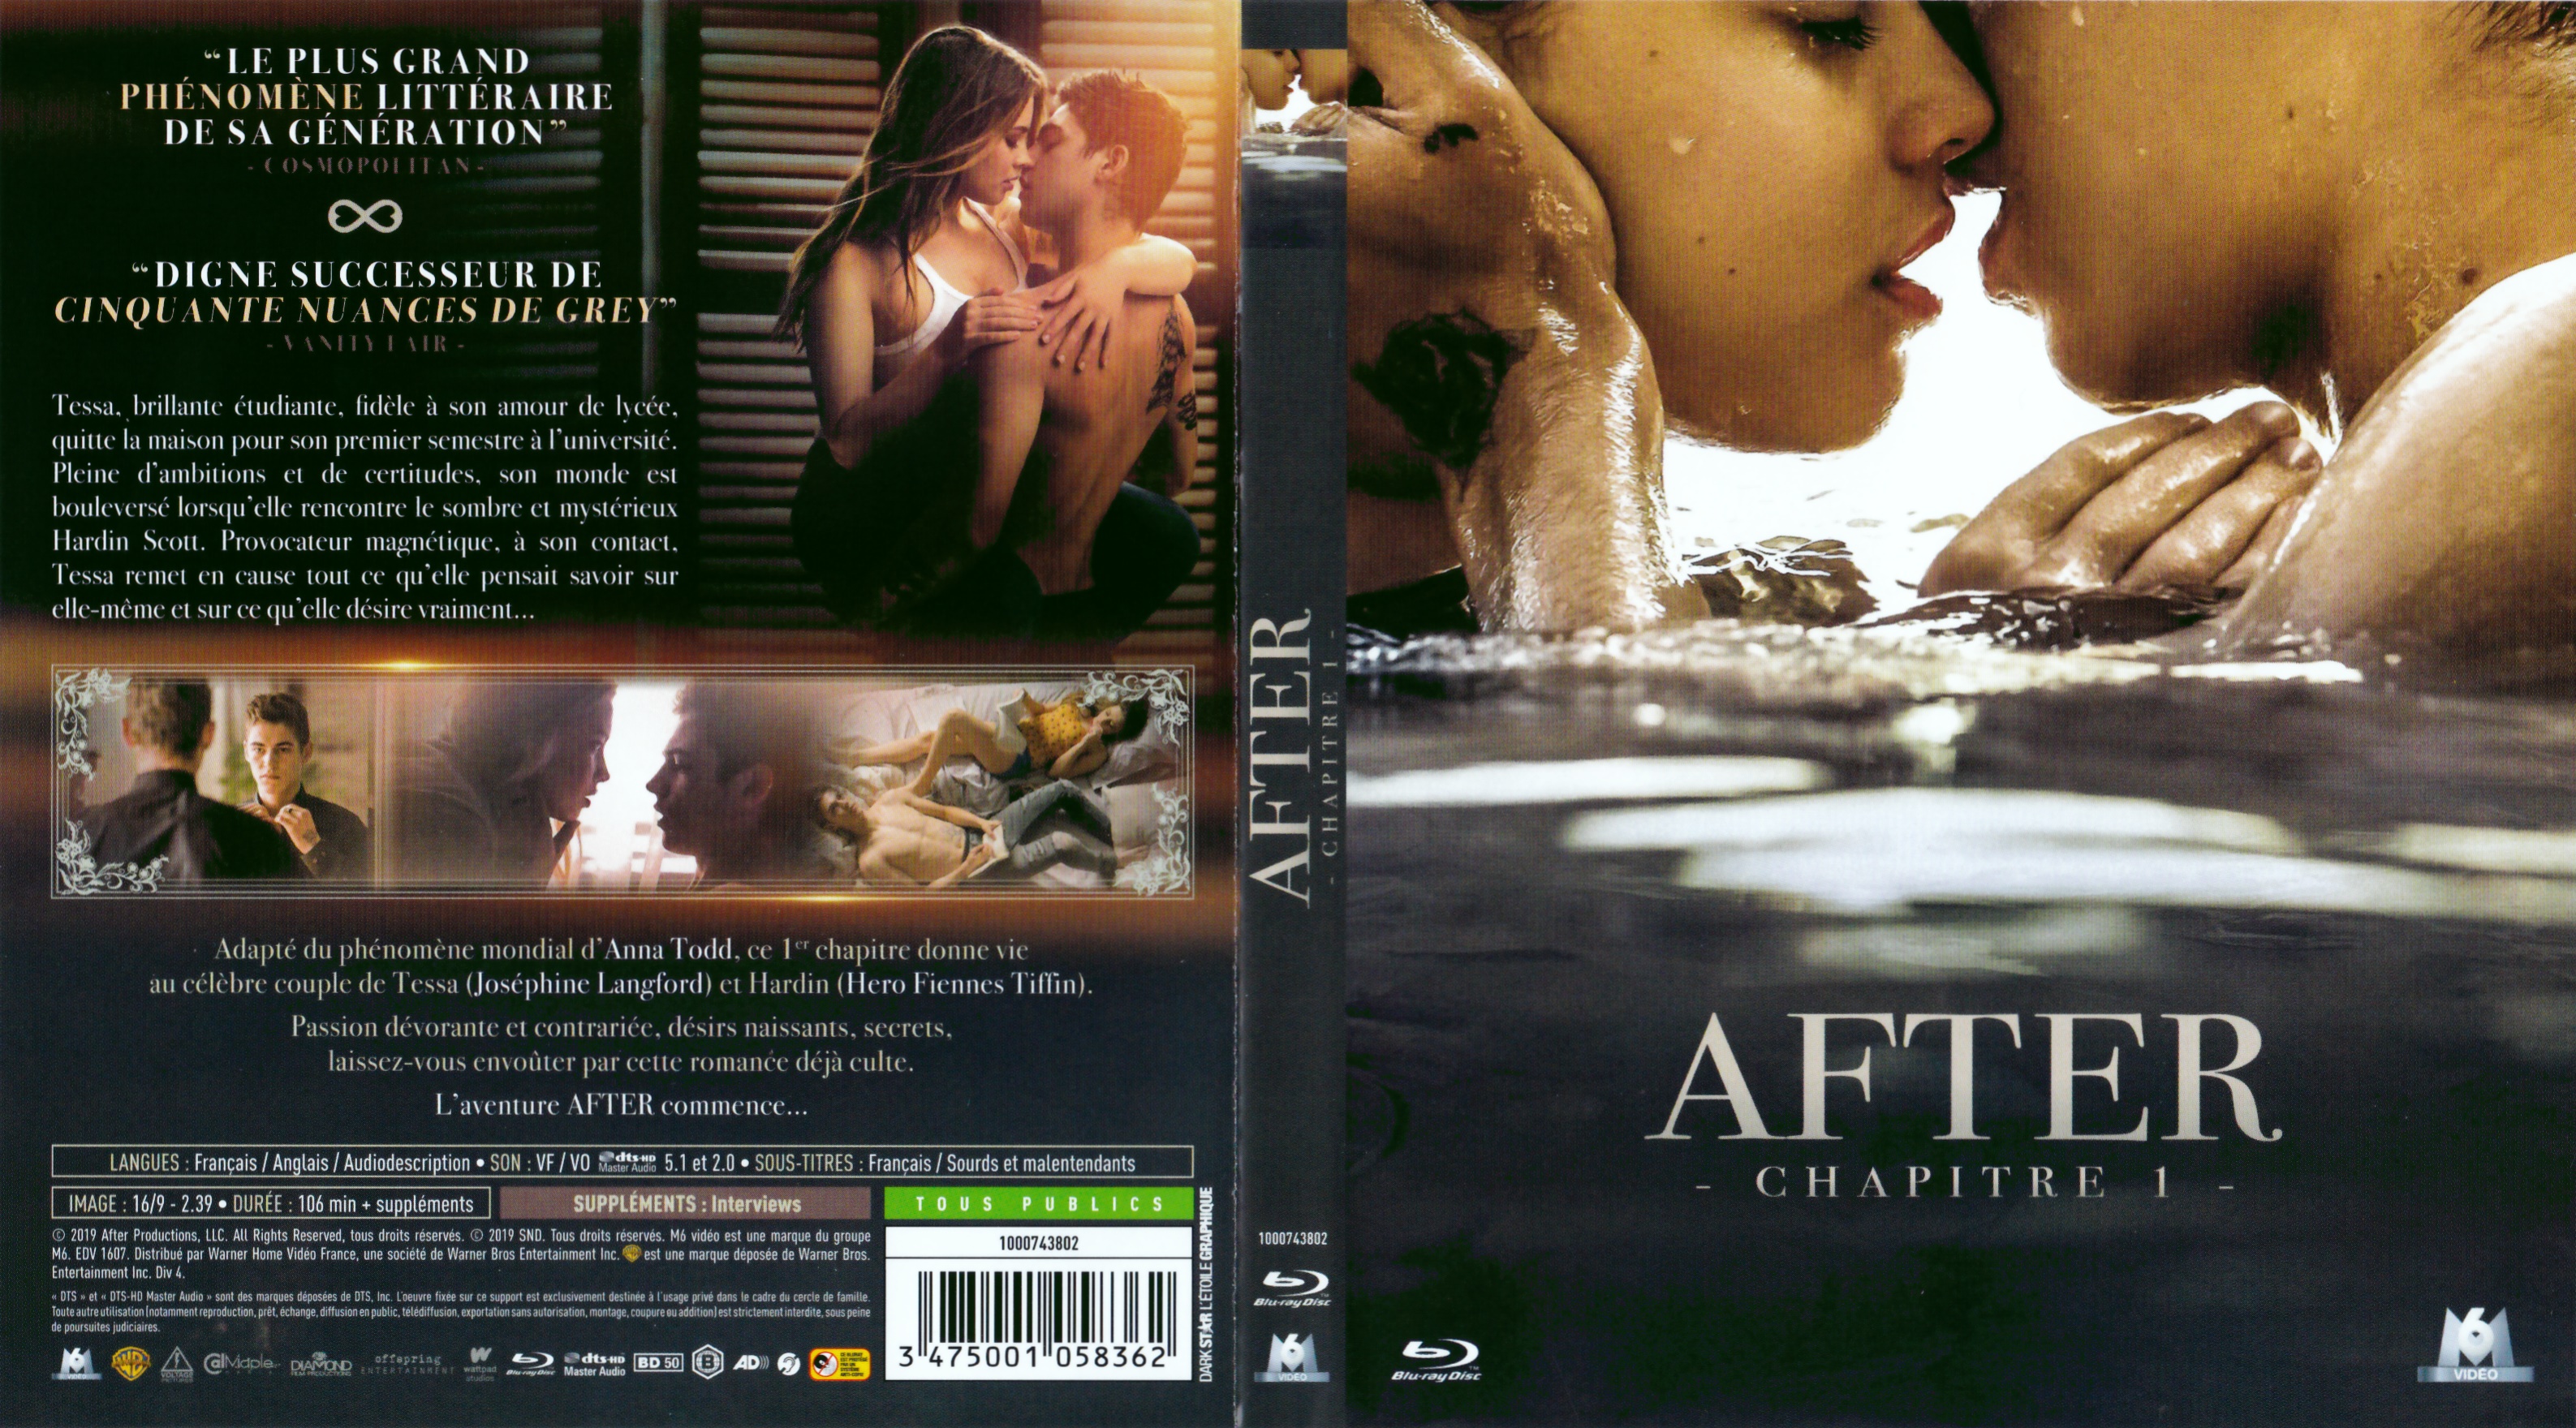 Jaquette DVD After Chapitre 1 (BLU-RAY)